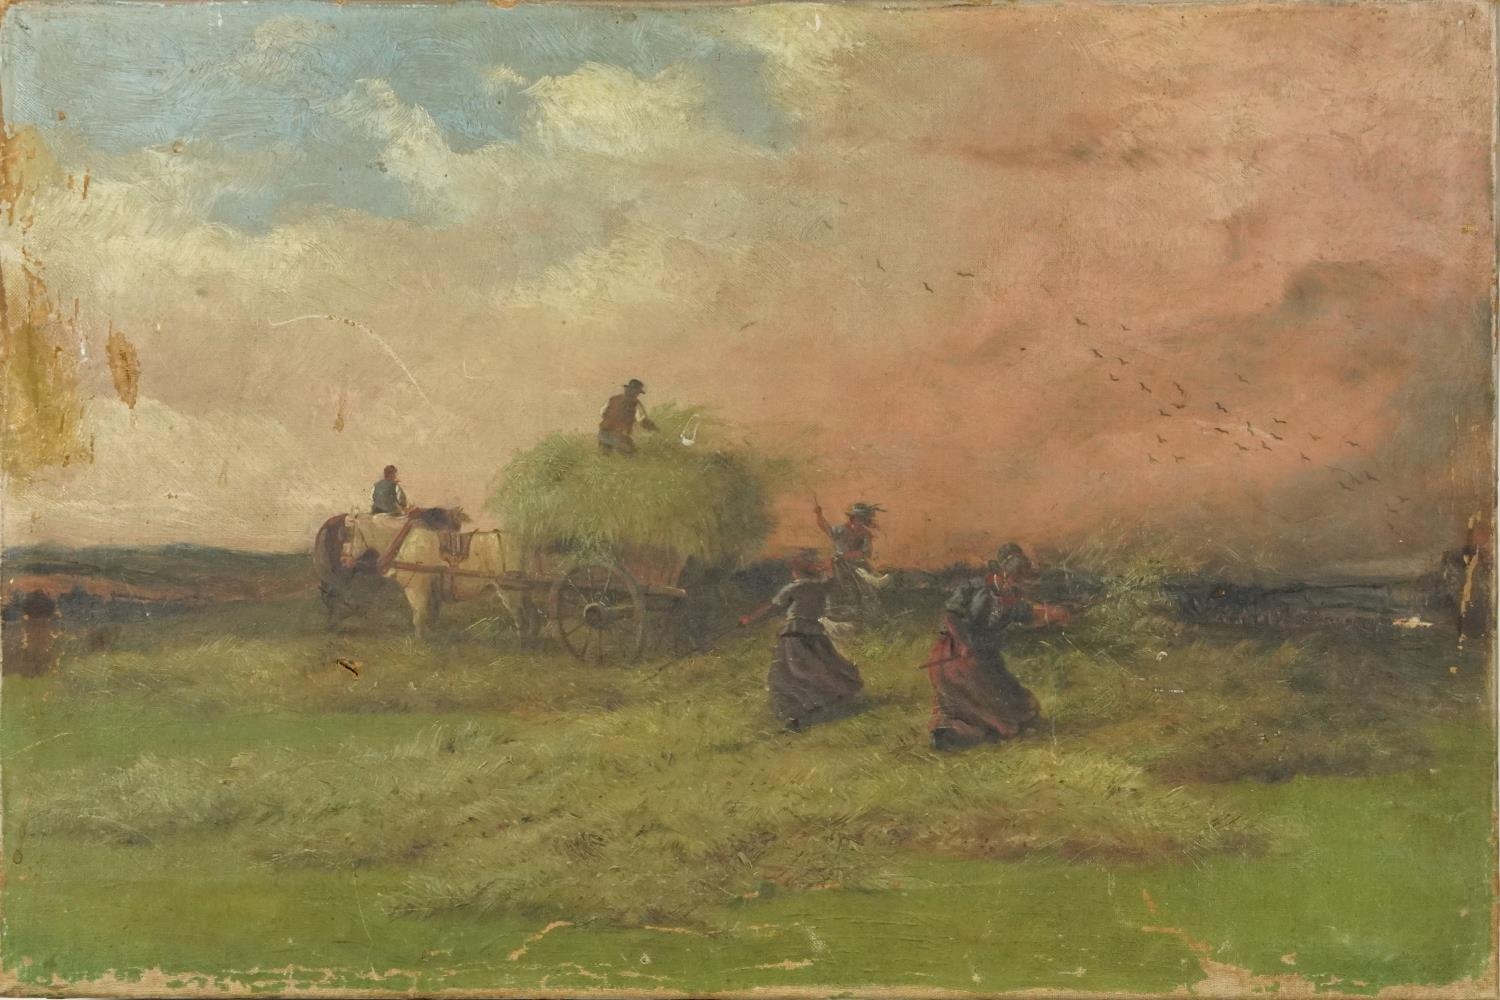 Smith - Toss the Hay When the Wind Blows, Thirsk, 19th century Irish school oil on canvas, inscribed